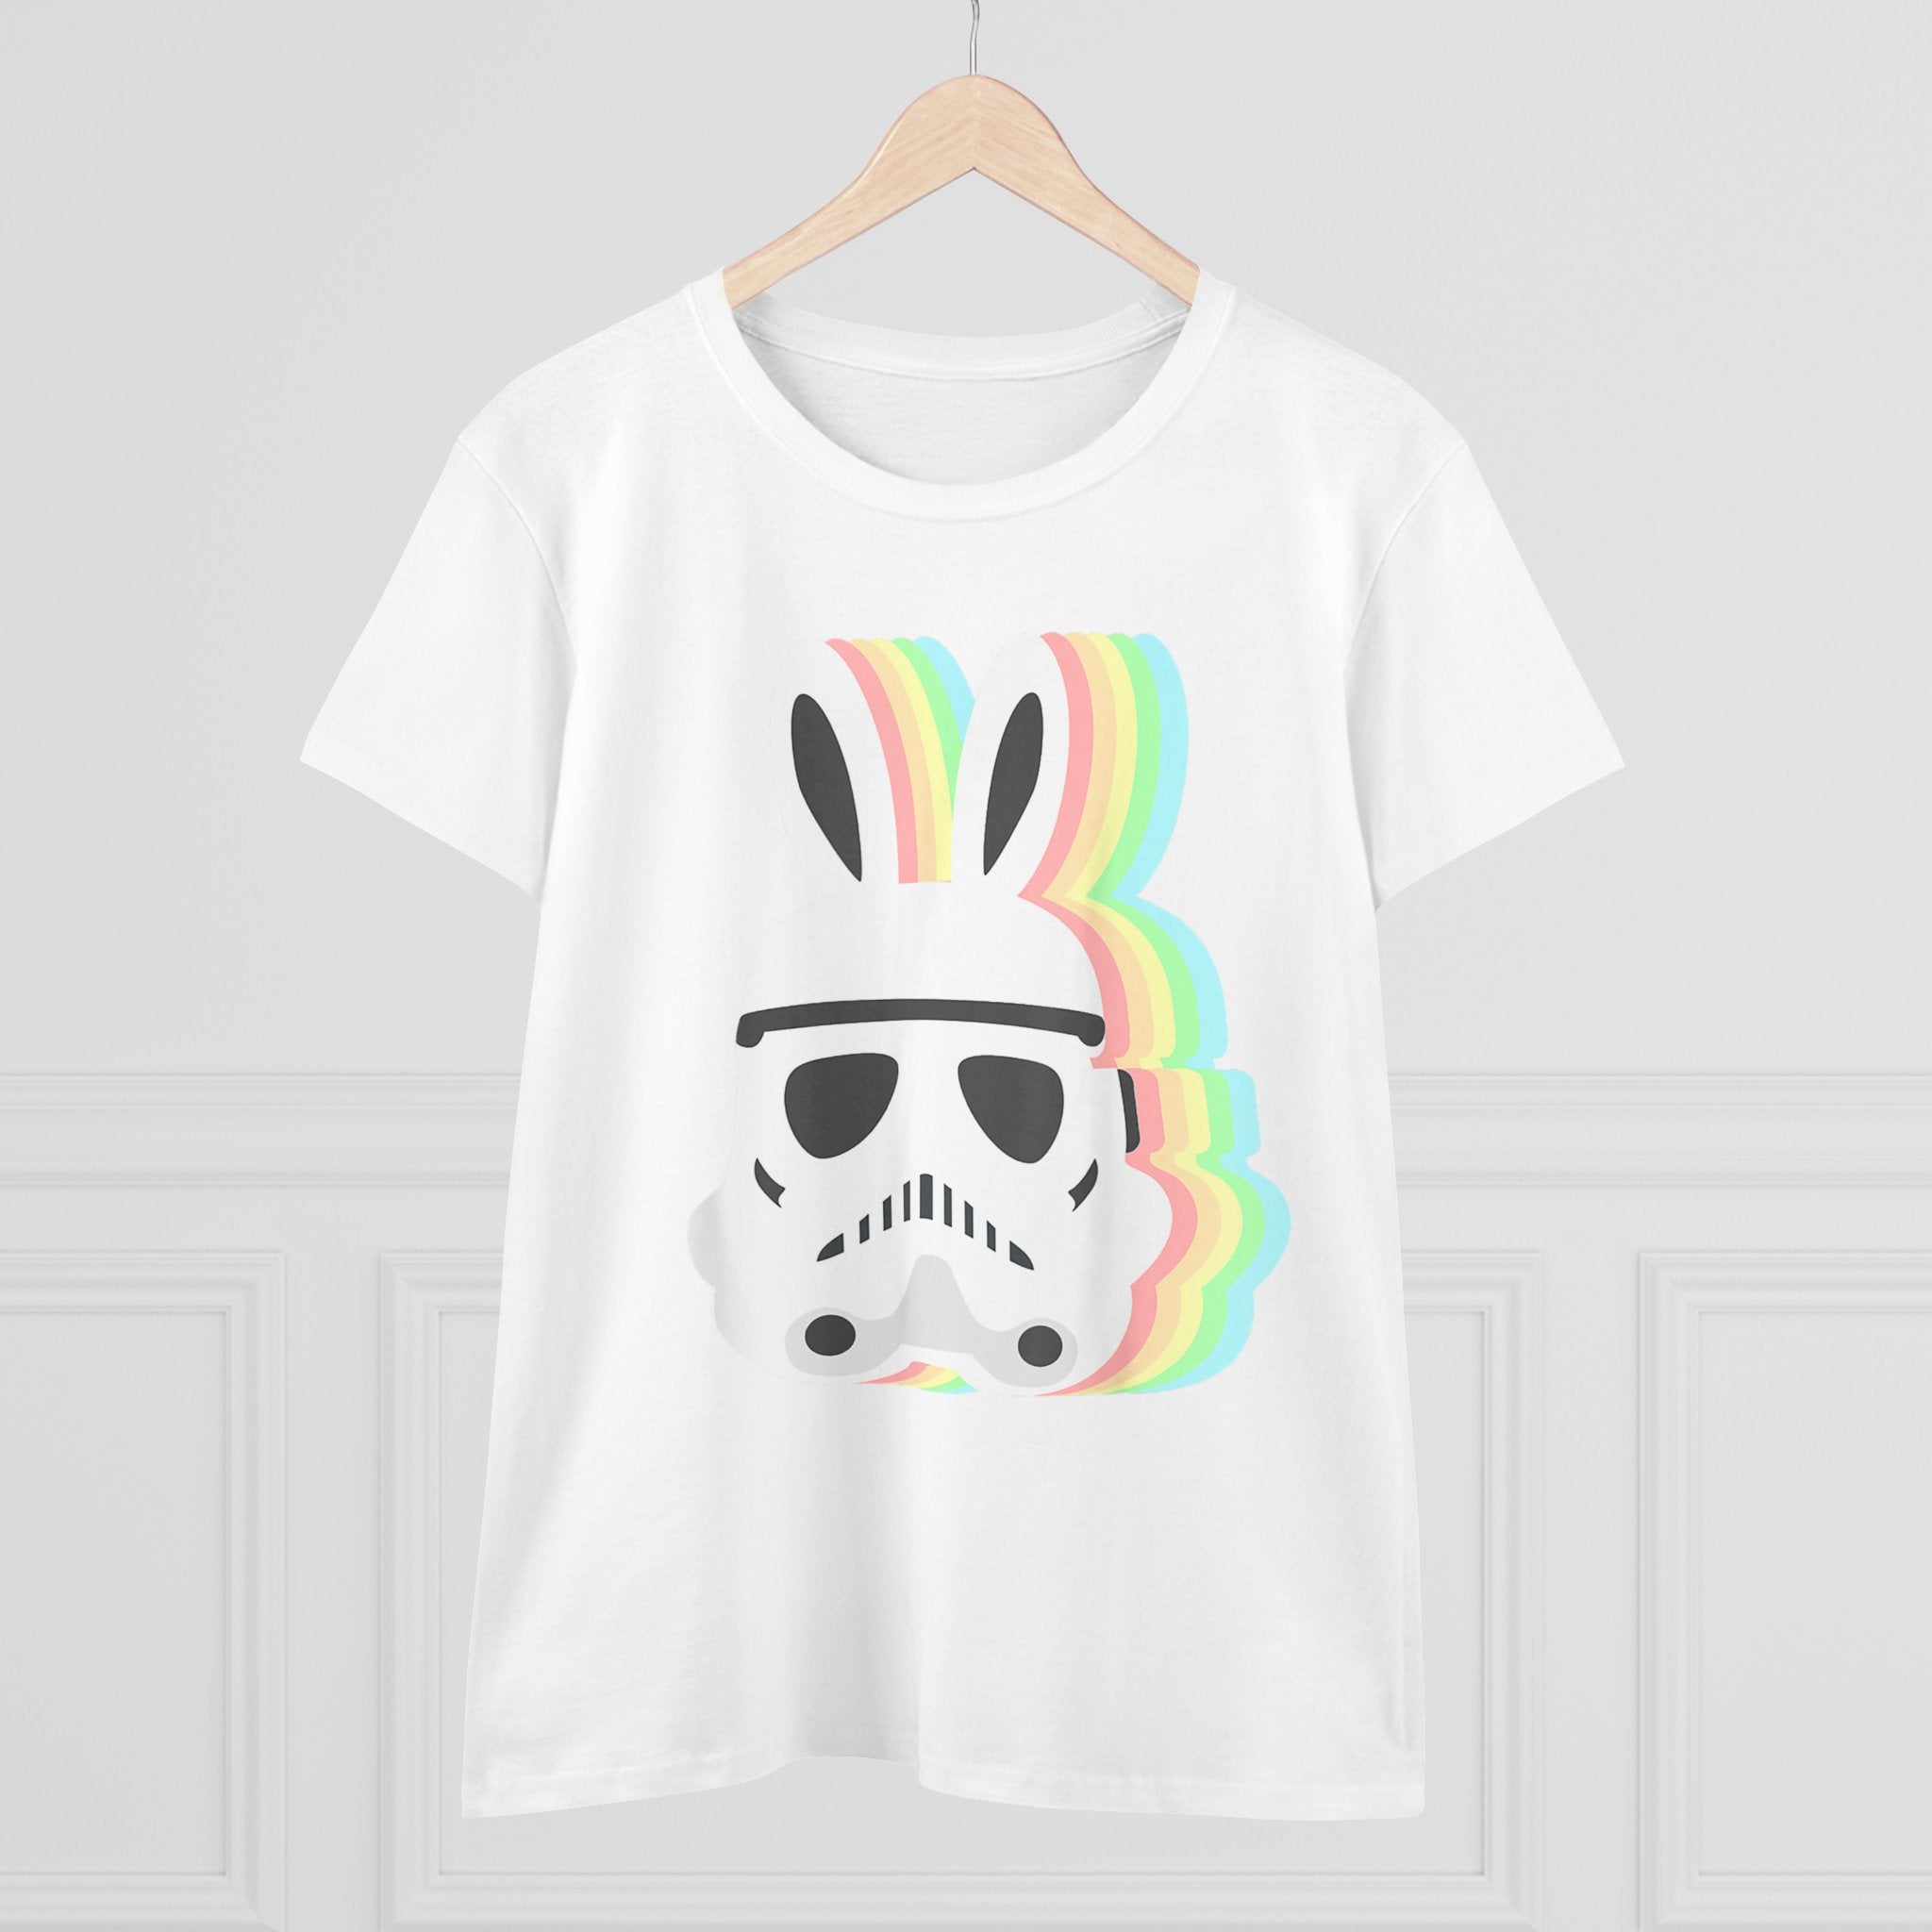 A white Star Wars Easter Stormtrooper - Women's Tee with a design featuring a black stormtrooper helmet adorned with bunny ears, dubbed the Easter Stormtrooper, and overlapping rainbow-colored shadows. The shirt is hung on a wooden hanger against a white wall.